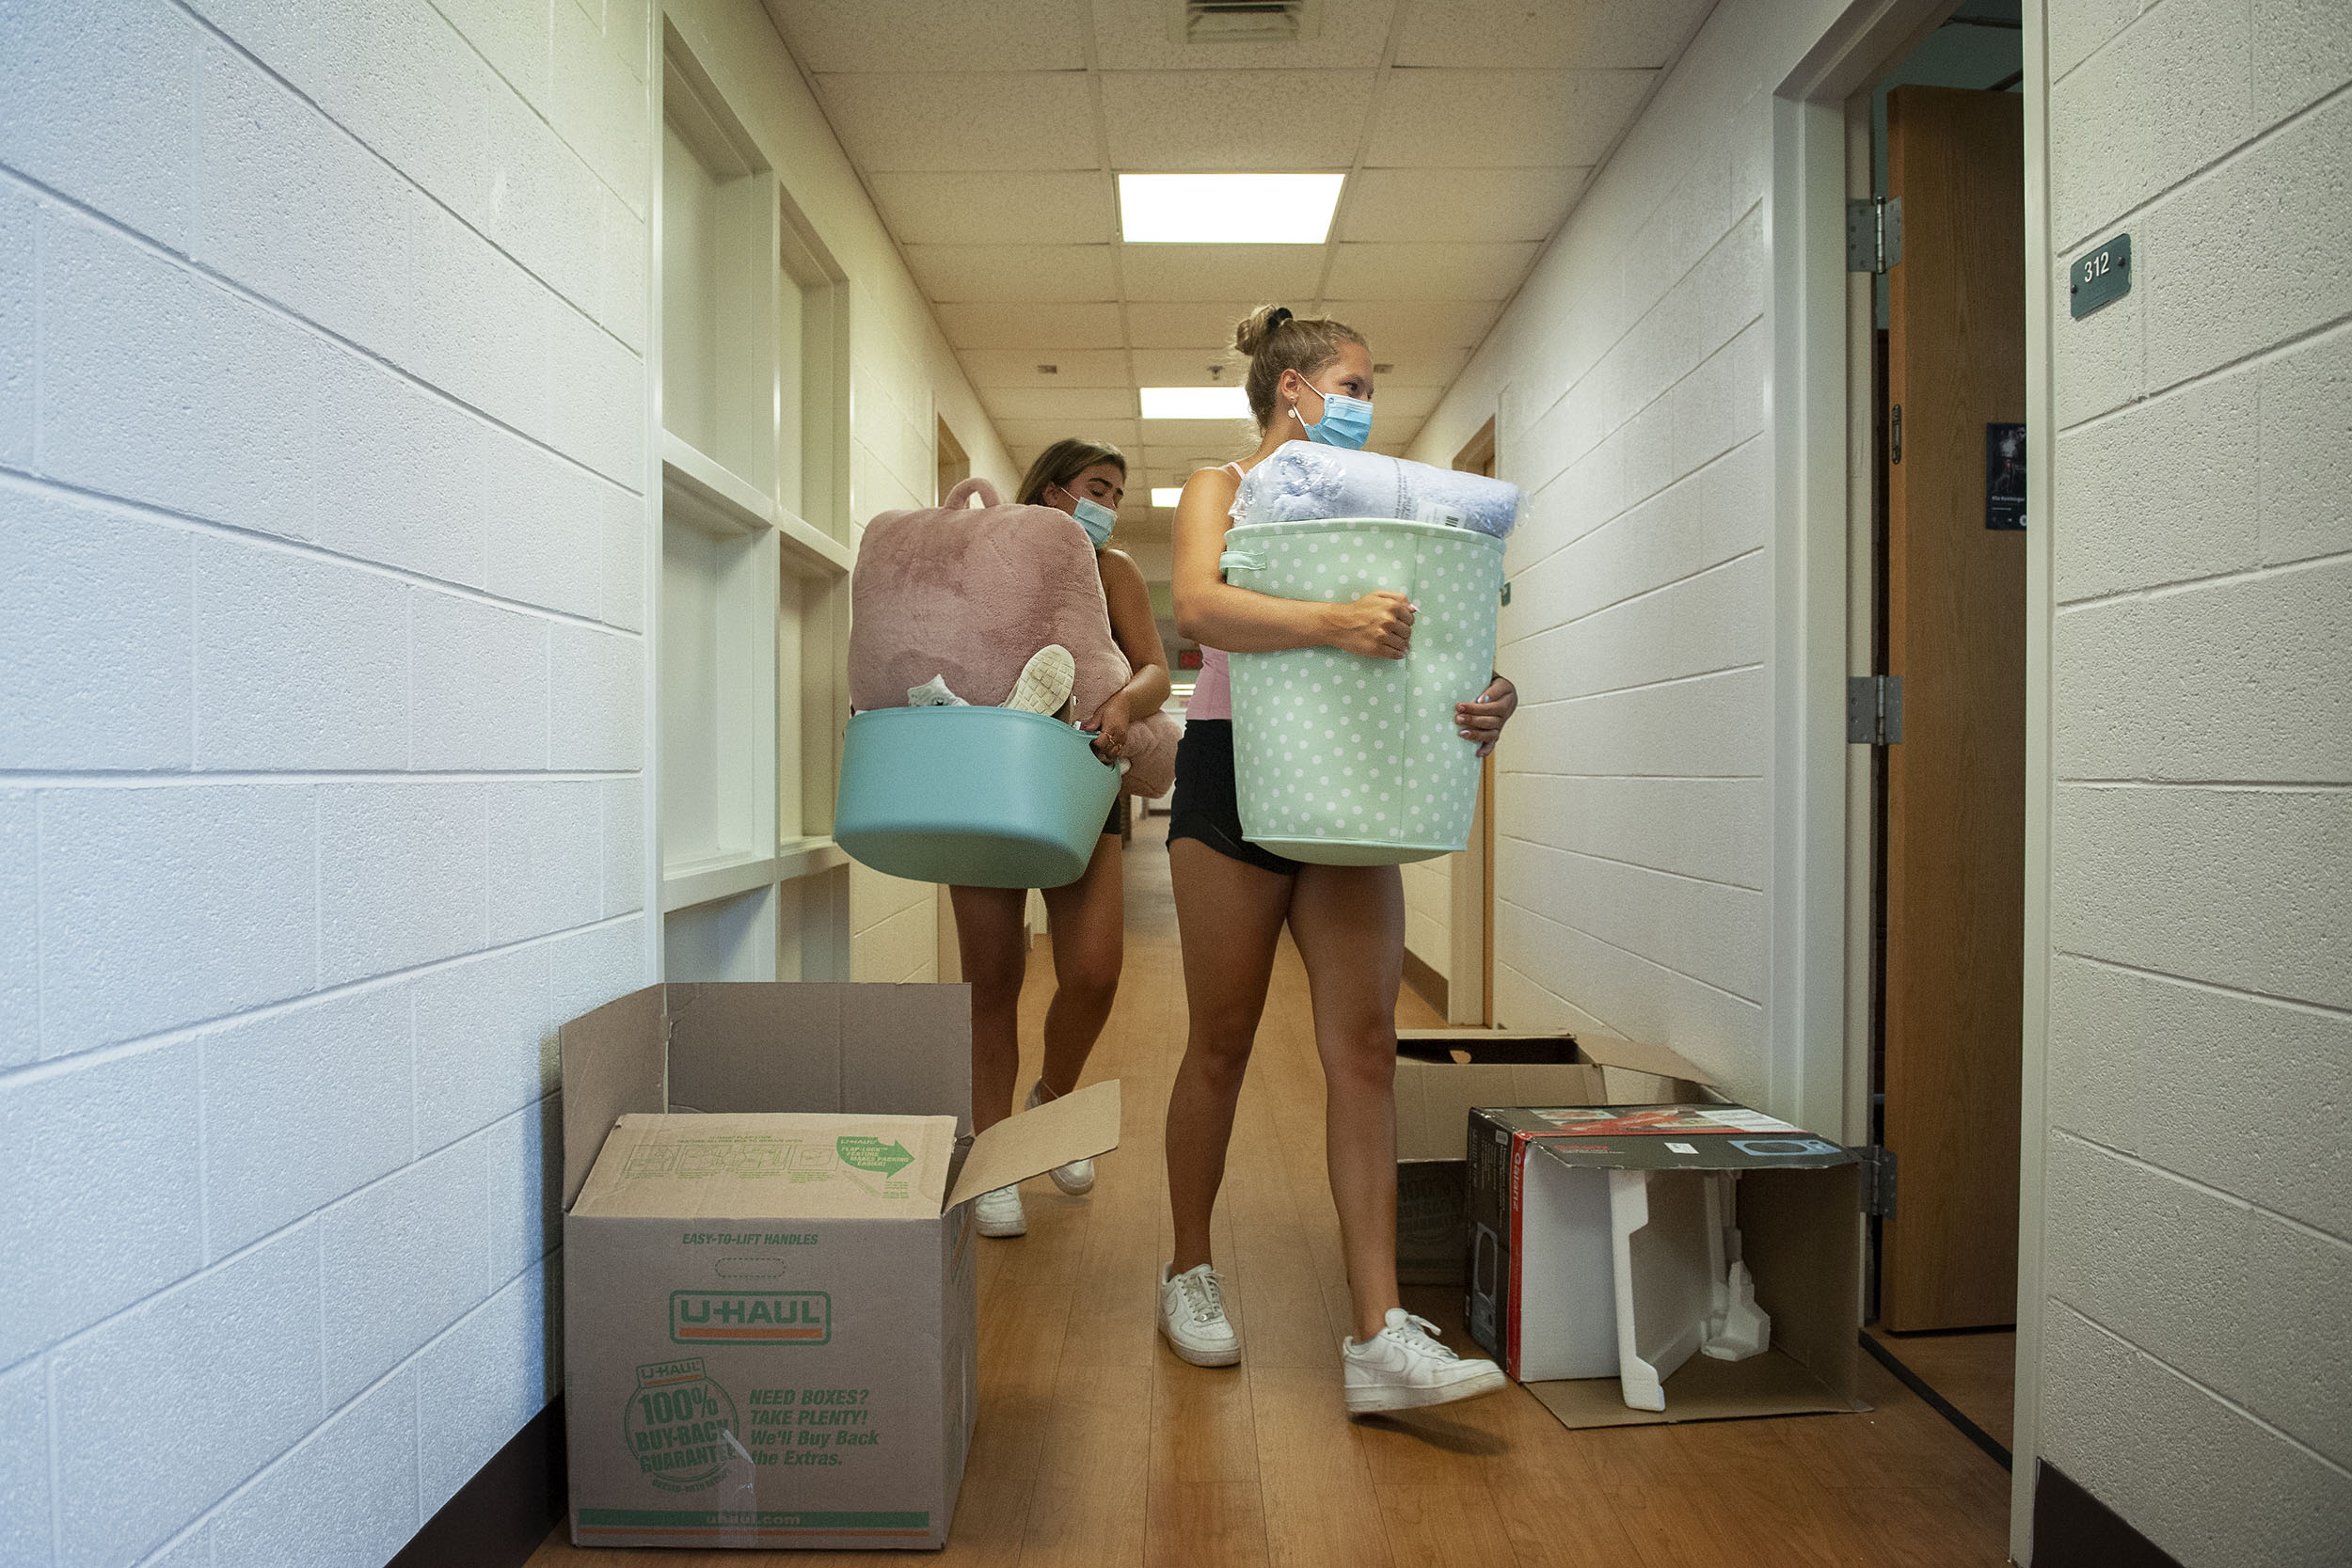 Two students walking into their dorm room with arms full of personal belongings